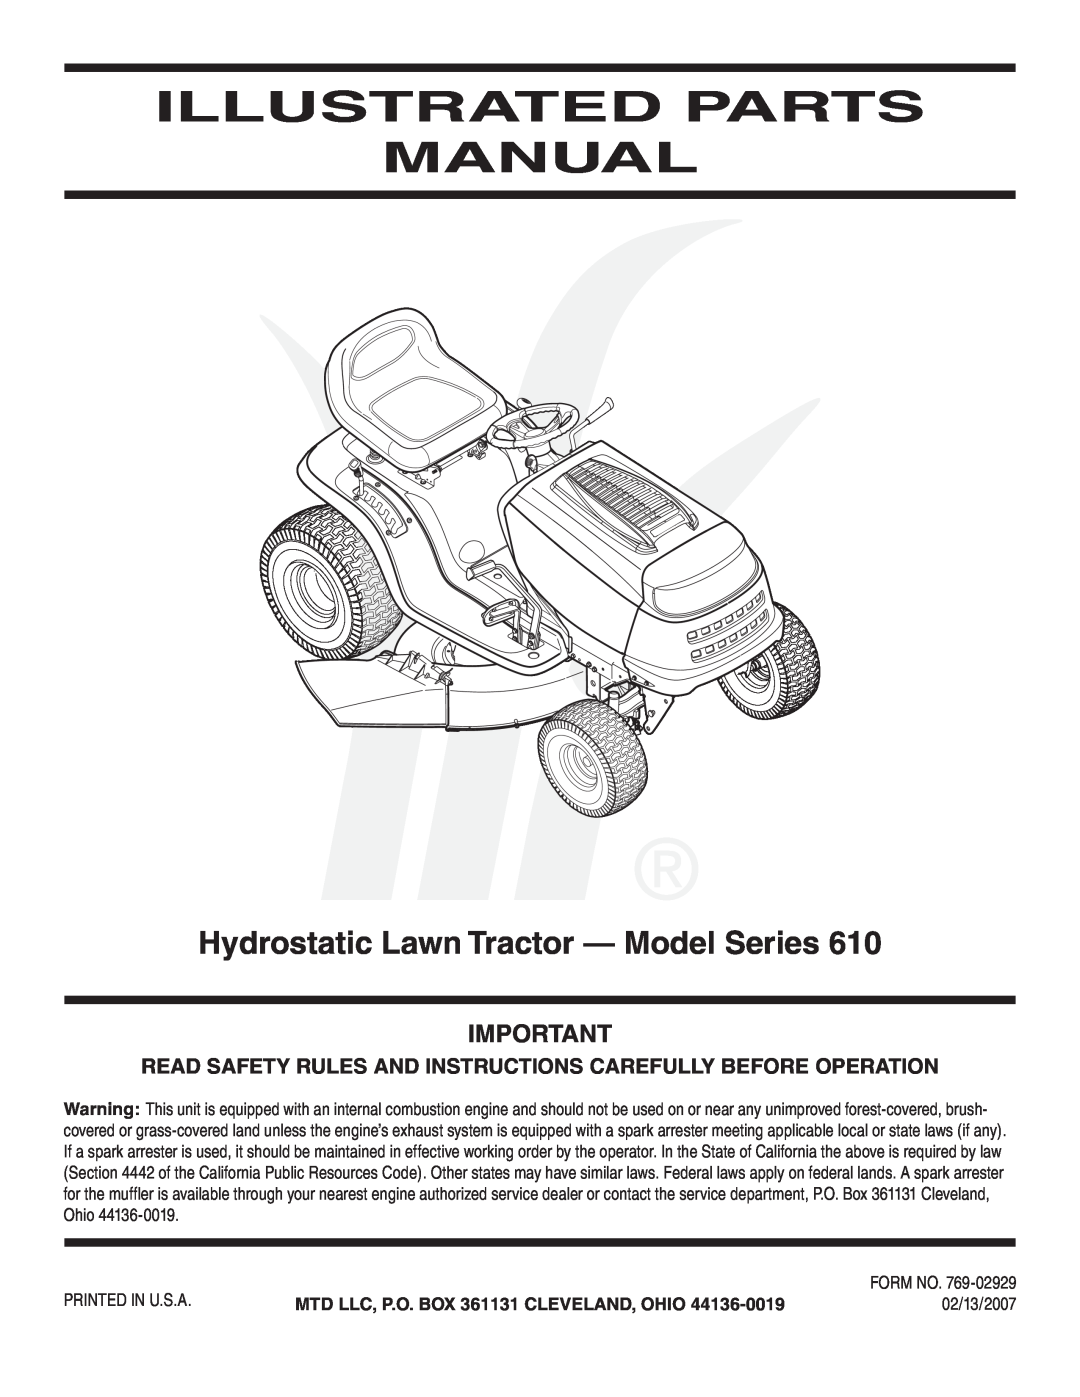 MTD 610 manual Read Safety Rules And Instructions Carefully Before Operation, MTD LLC, P.O. BOX 361131 CLEVELAND, OHIO 